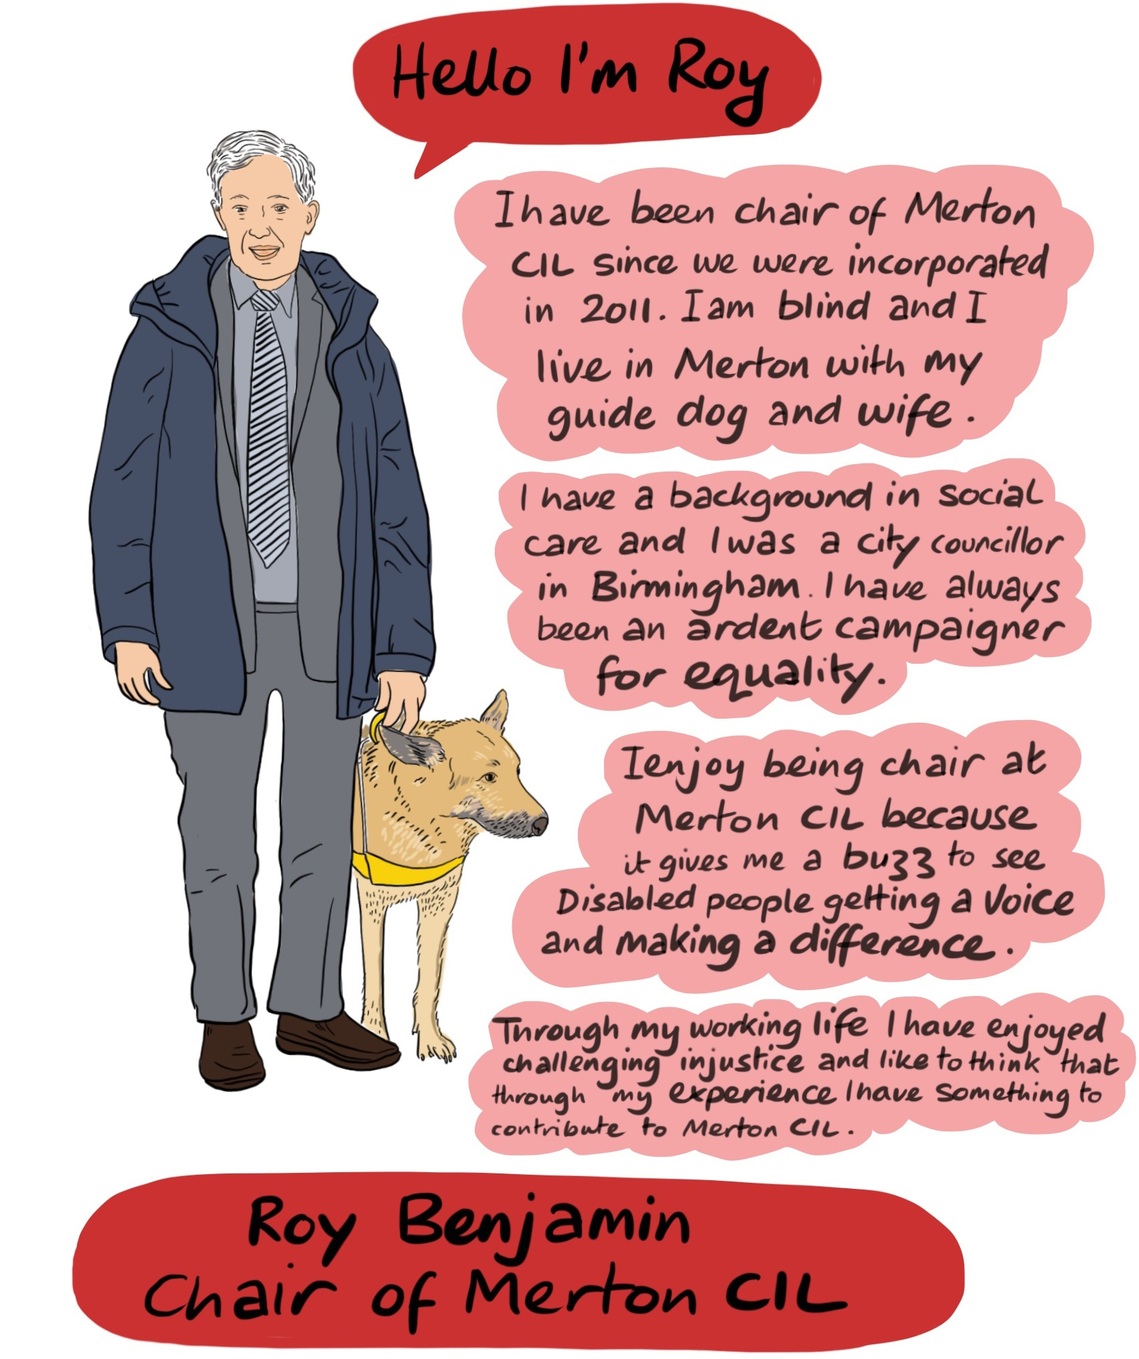 Roy Benjamin, Chair of Merton CIL - I have been chair of Merton CIL since we were incorporated in 2011. I am blind and I live Merton with my guide dog and wife. I have a background in social care and I was a city councillor in Birmingham. I have always been an ardent campaigner for equality. I enjoy being chair at Merton CIL because it gives me a buzz to see Disabled people get a voice and make a difference. Through my working life I have enjoyed challening injustice and like to think that through my experience I have something to contribute to Merton CIL. 